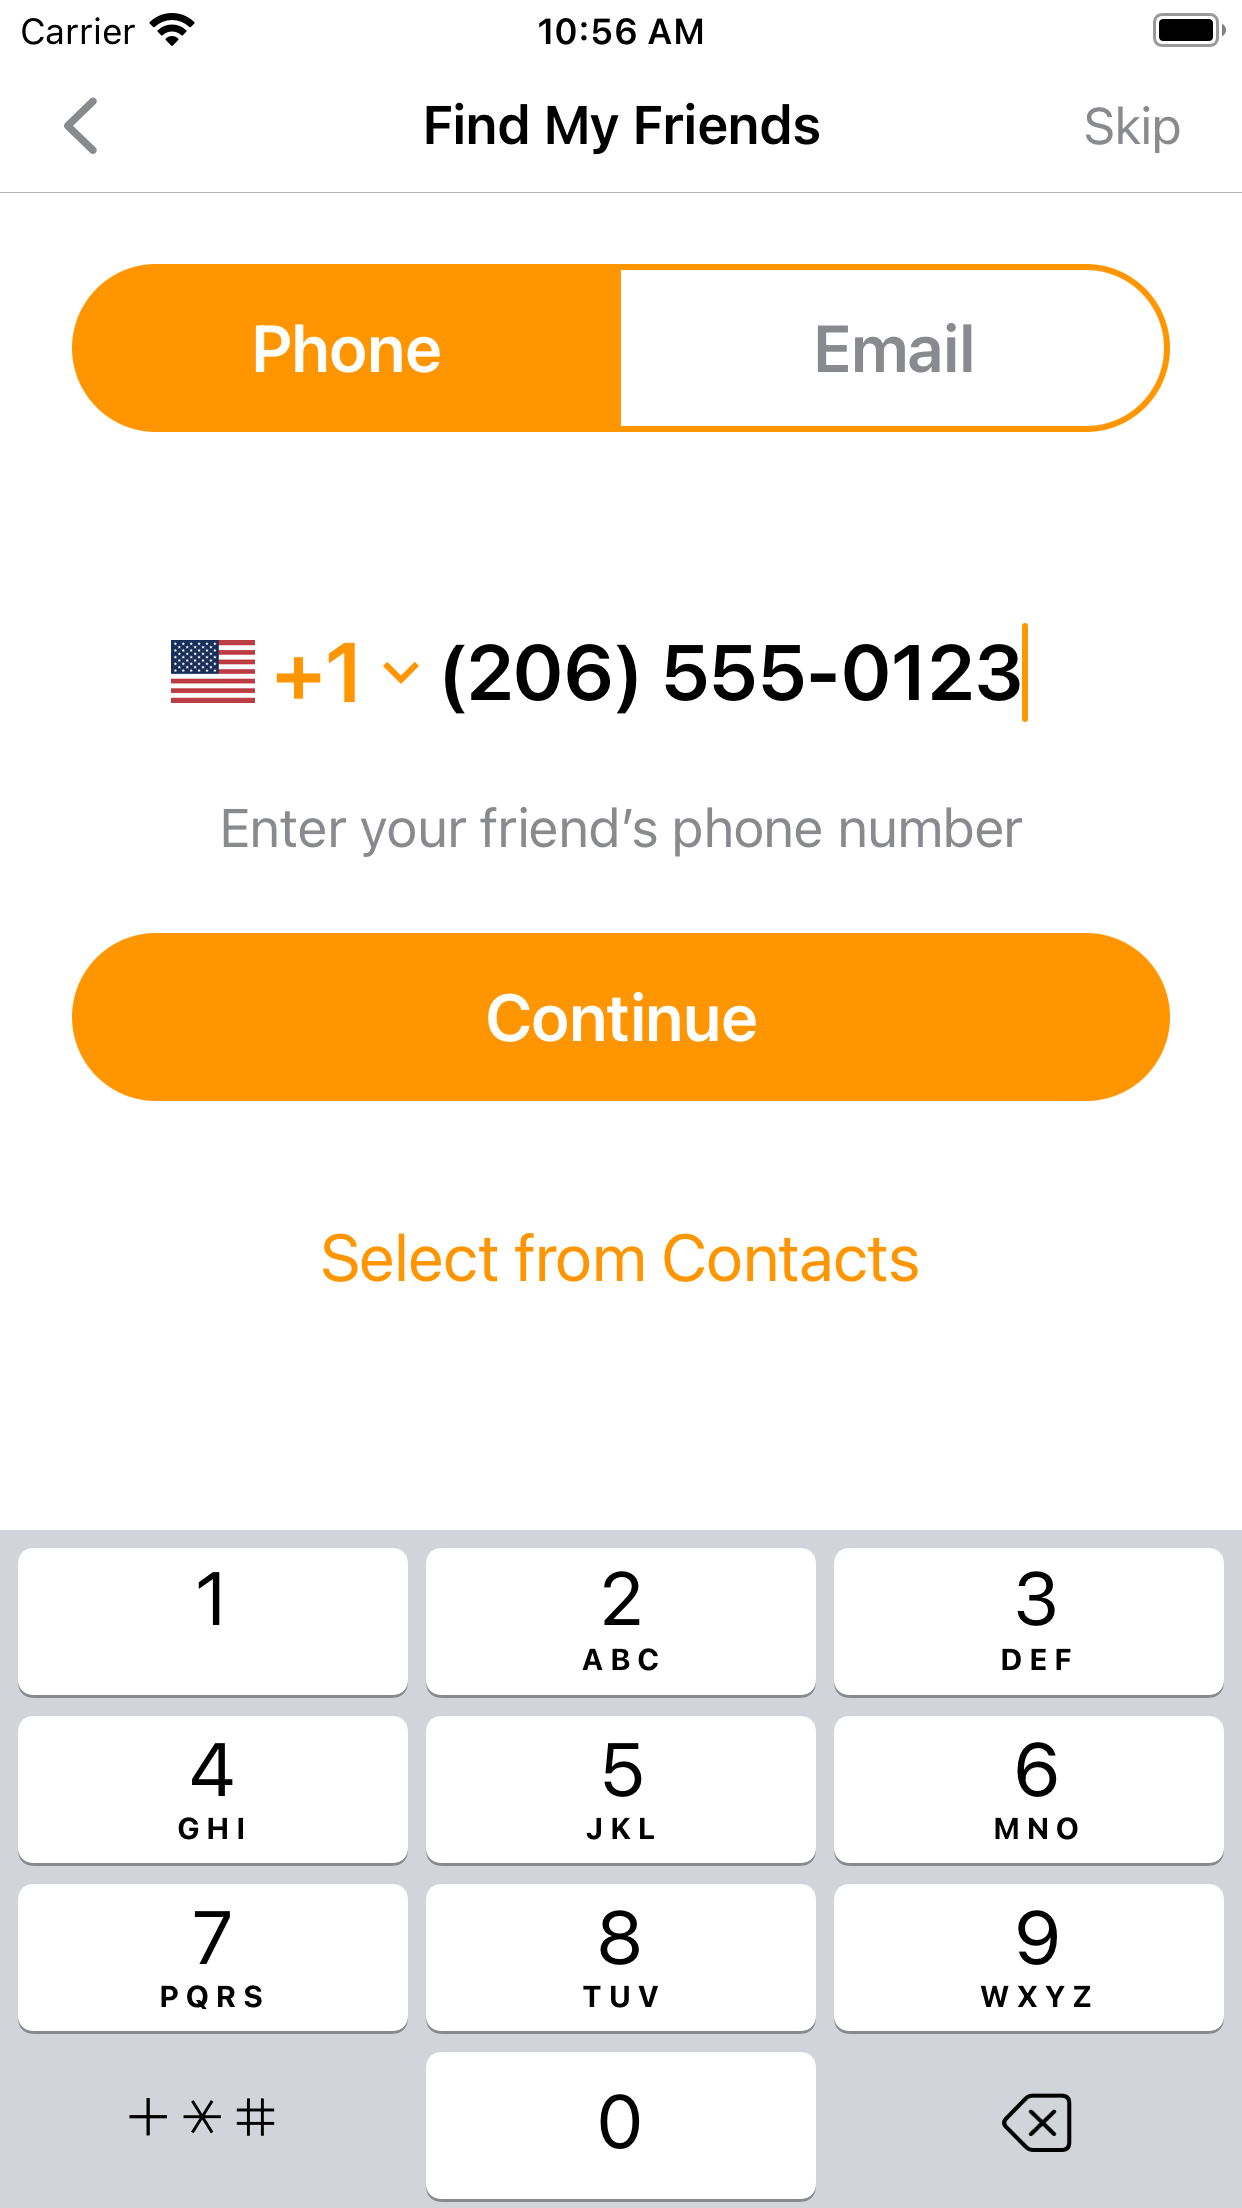 Locate your friends and family by phone number or email address